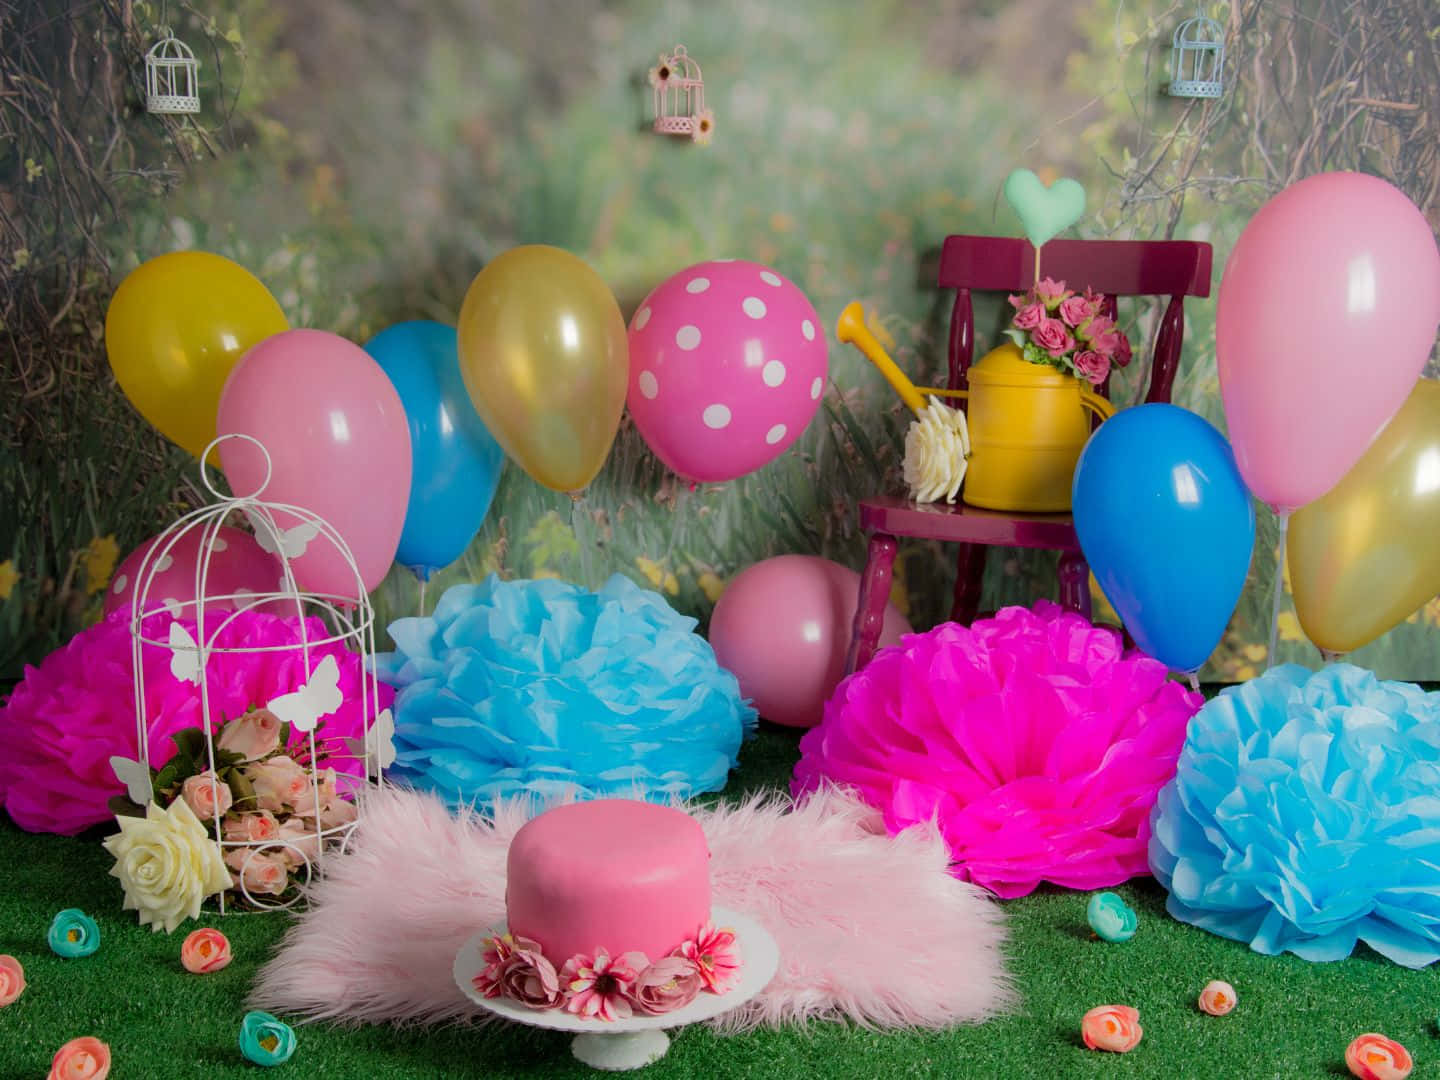 a birthday party with balloons and a cake Wallpaper